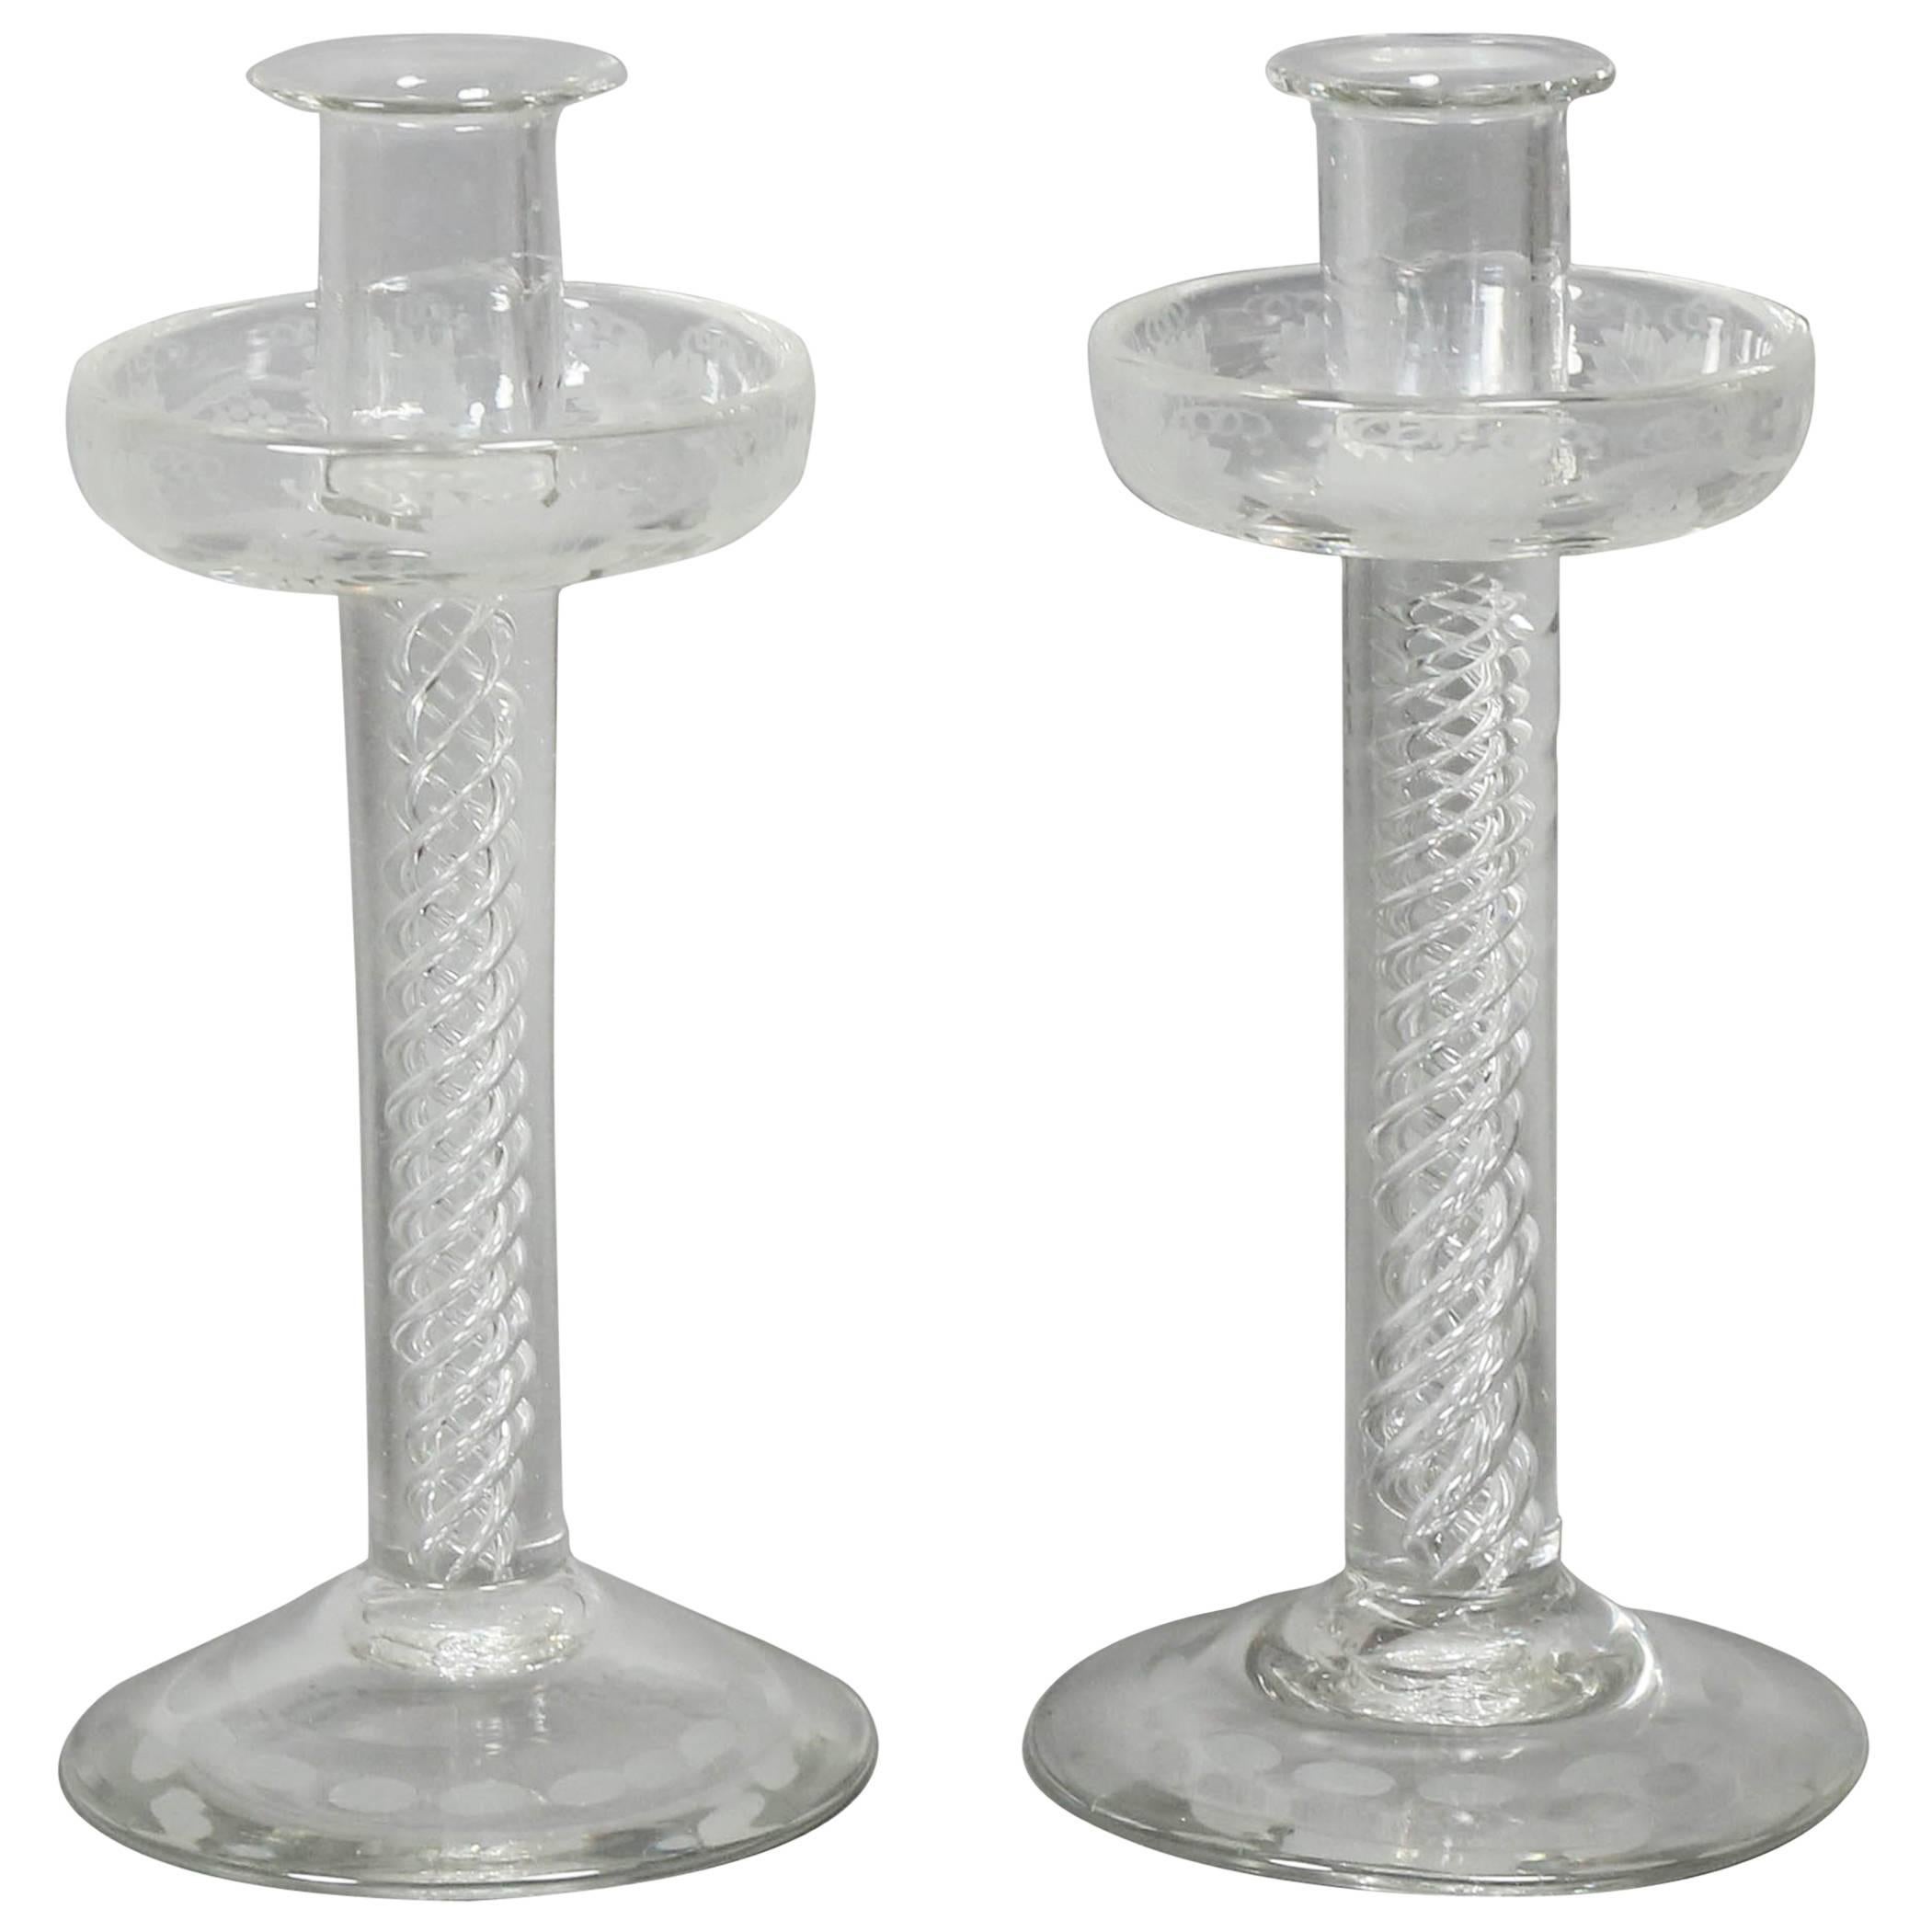 Pair of Victorian Etched Glass Candlesticks